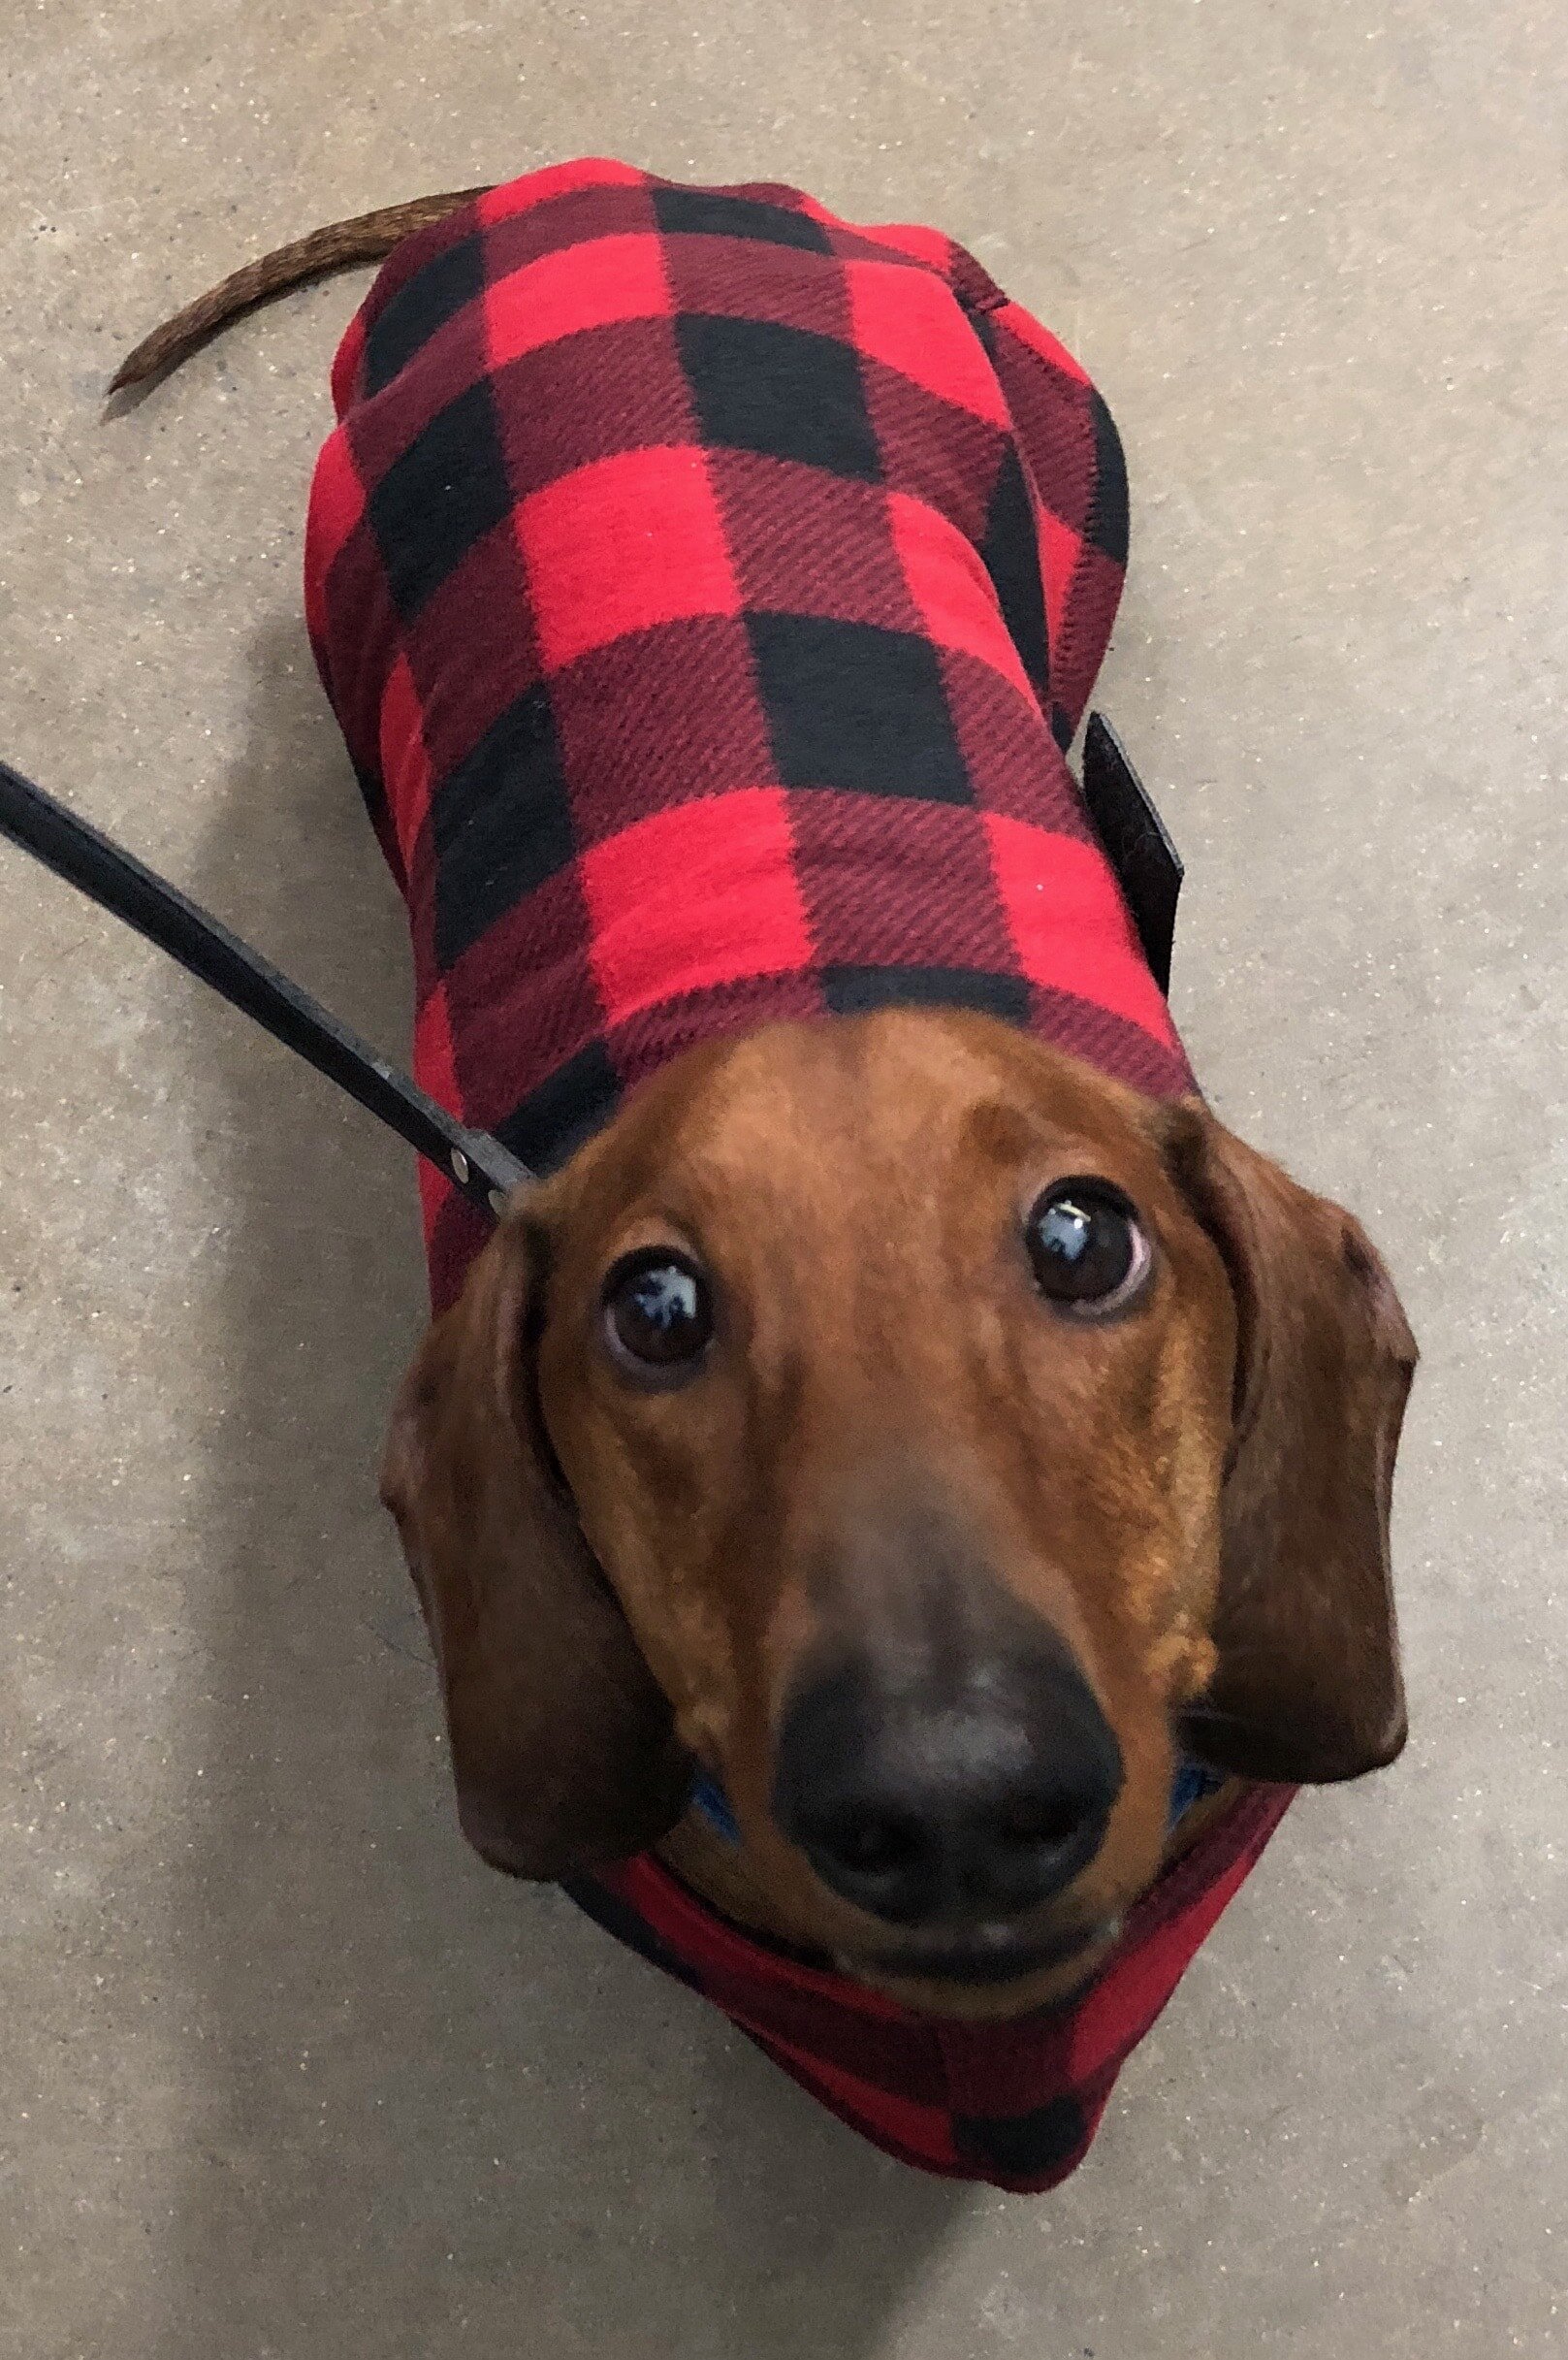 OFPUPPY Plaid Fleece Dress Jacket for Large Dogs Red Decent Style with Bowtie Puppy Winter Clothes Coat 